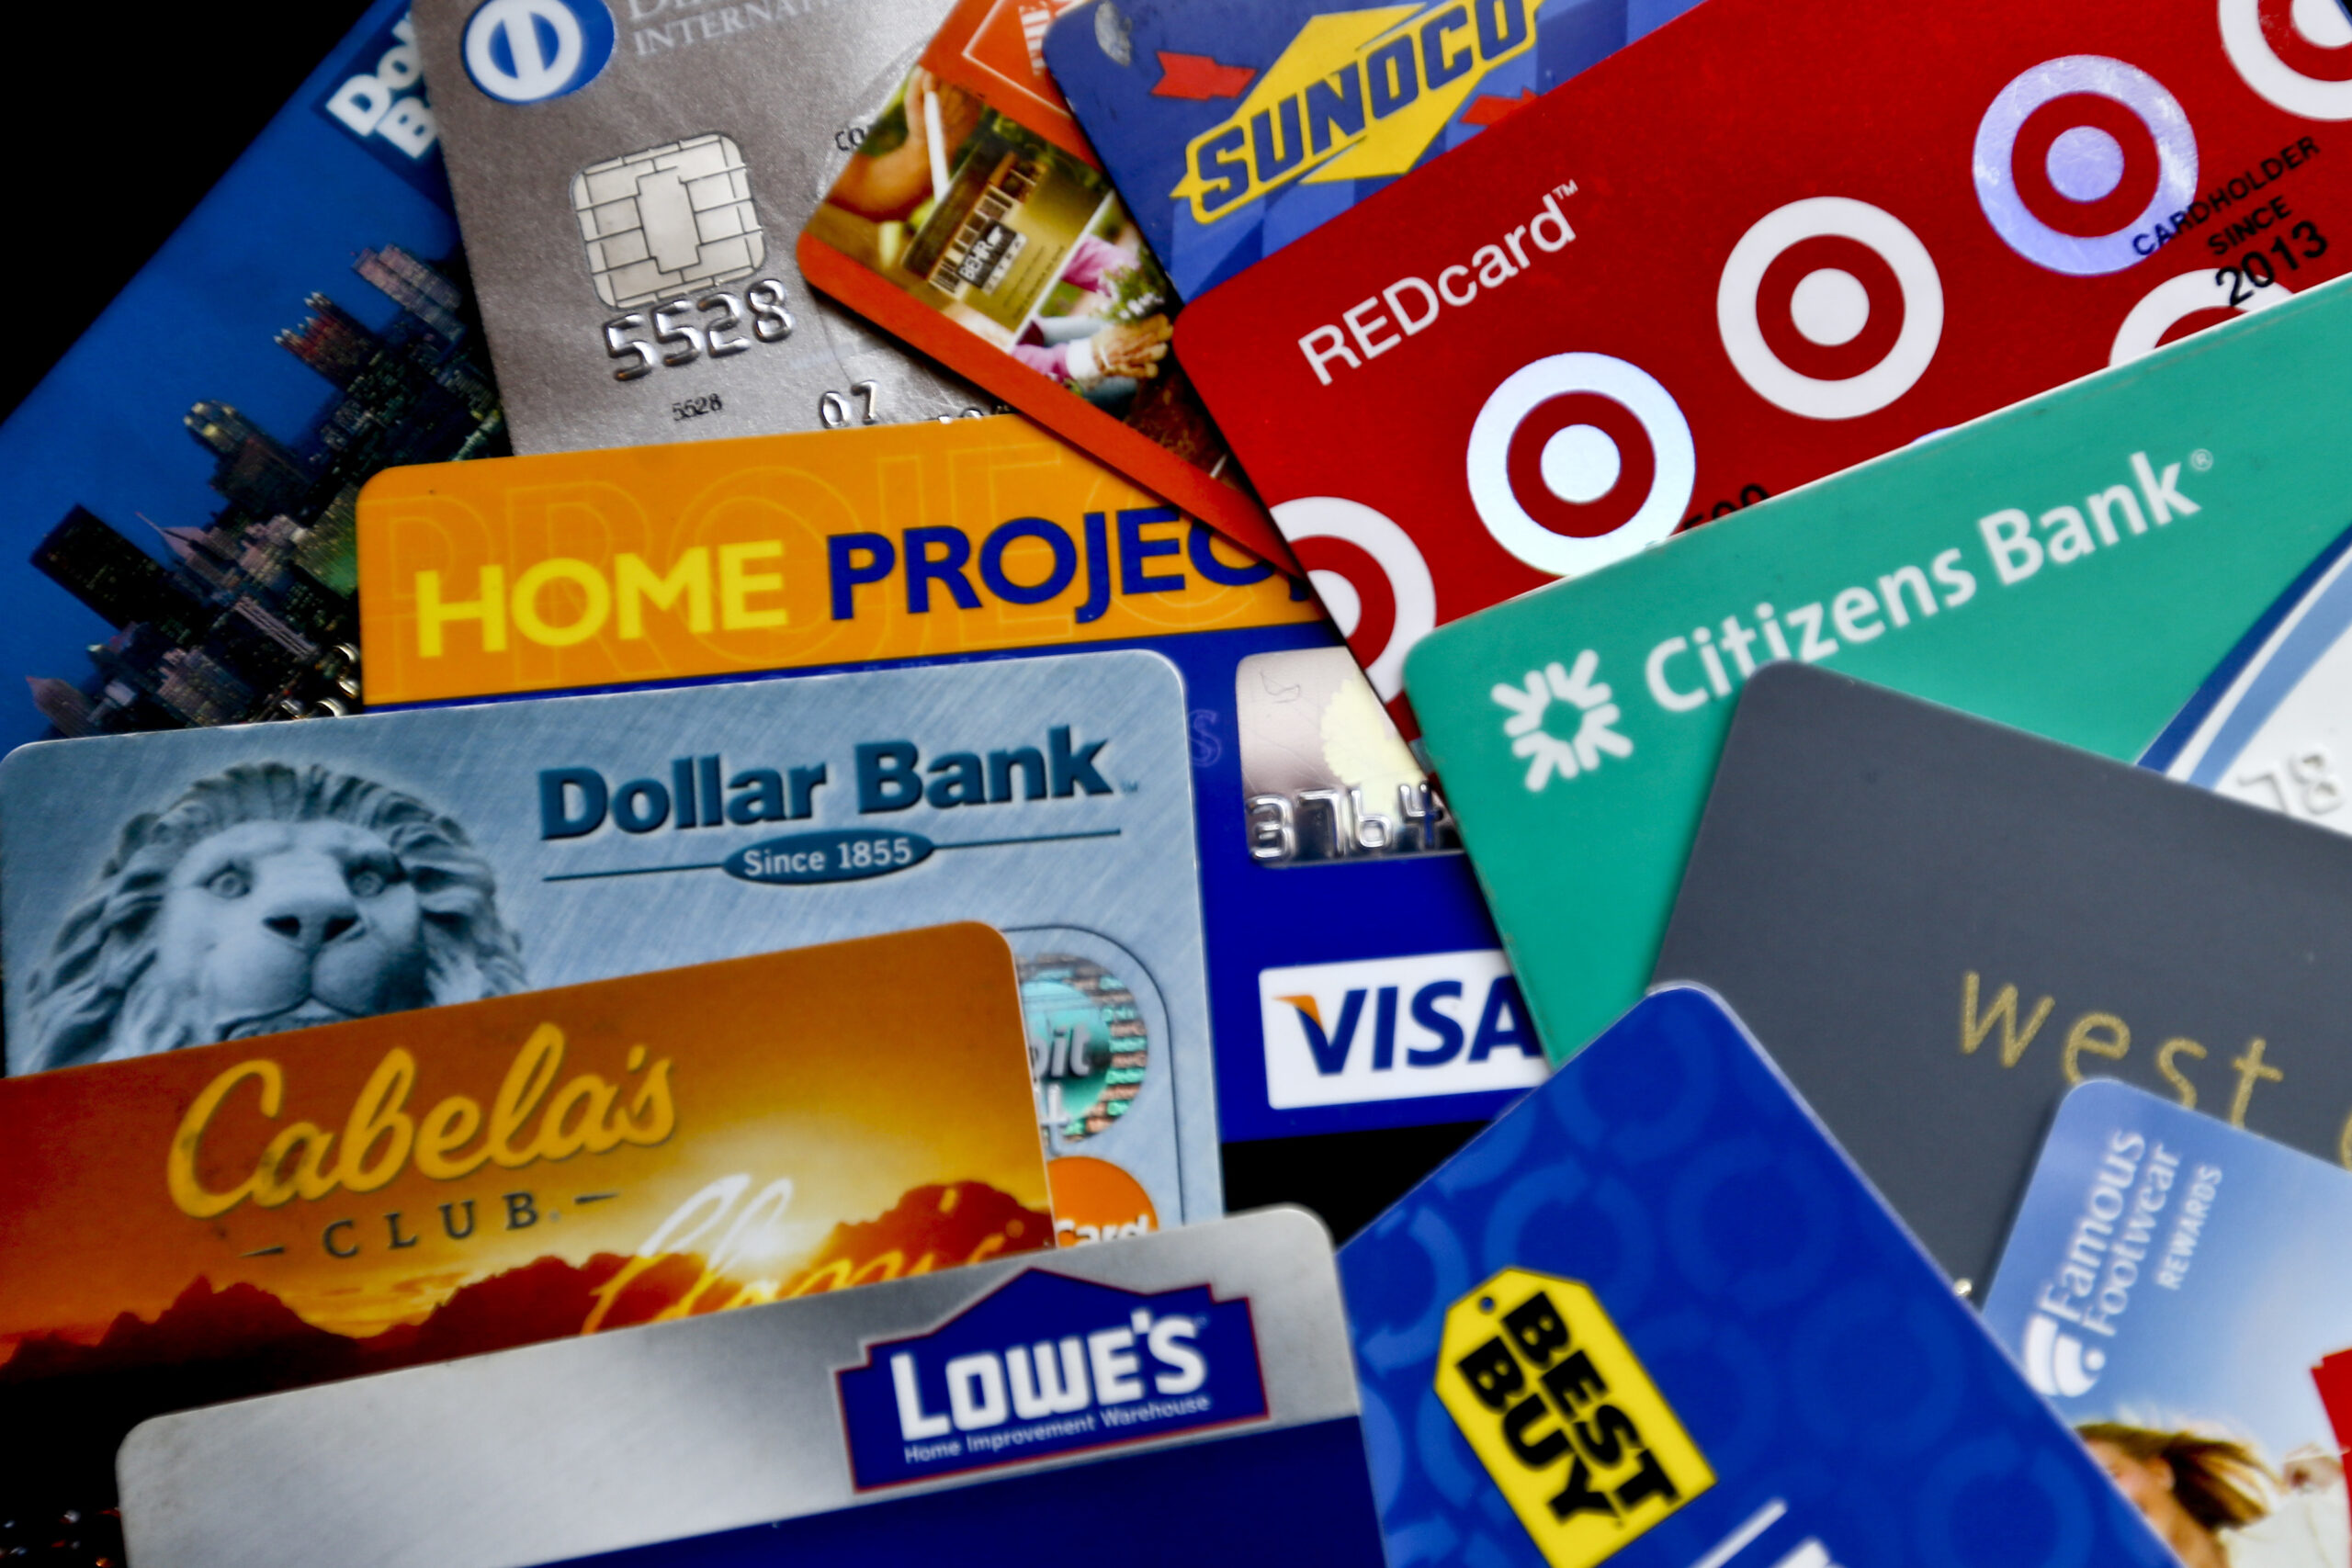 Consumer alert: DATCP receives complaints after consumers find new gift cards have no funds